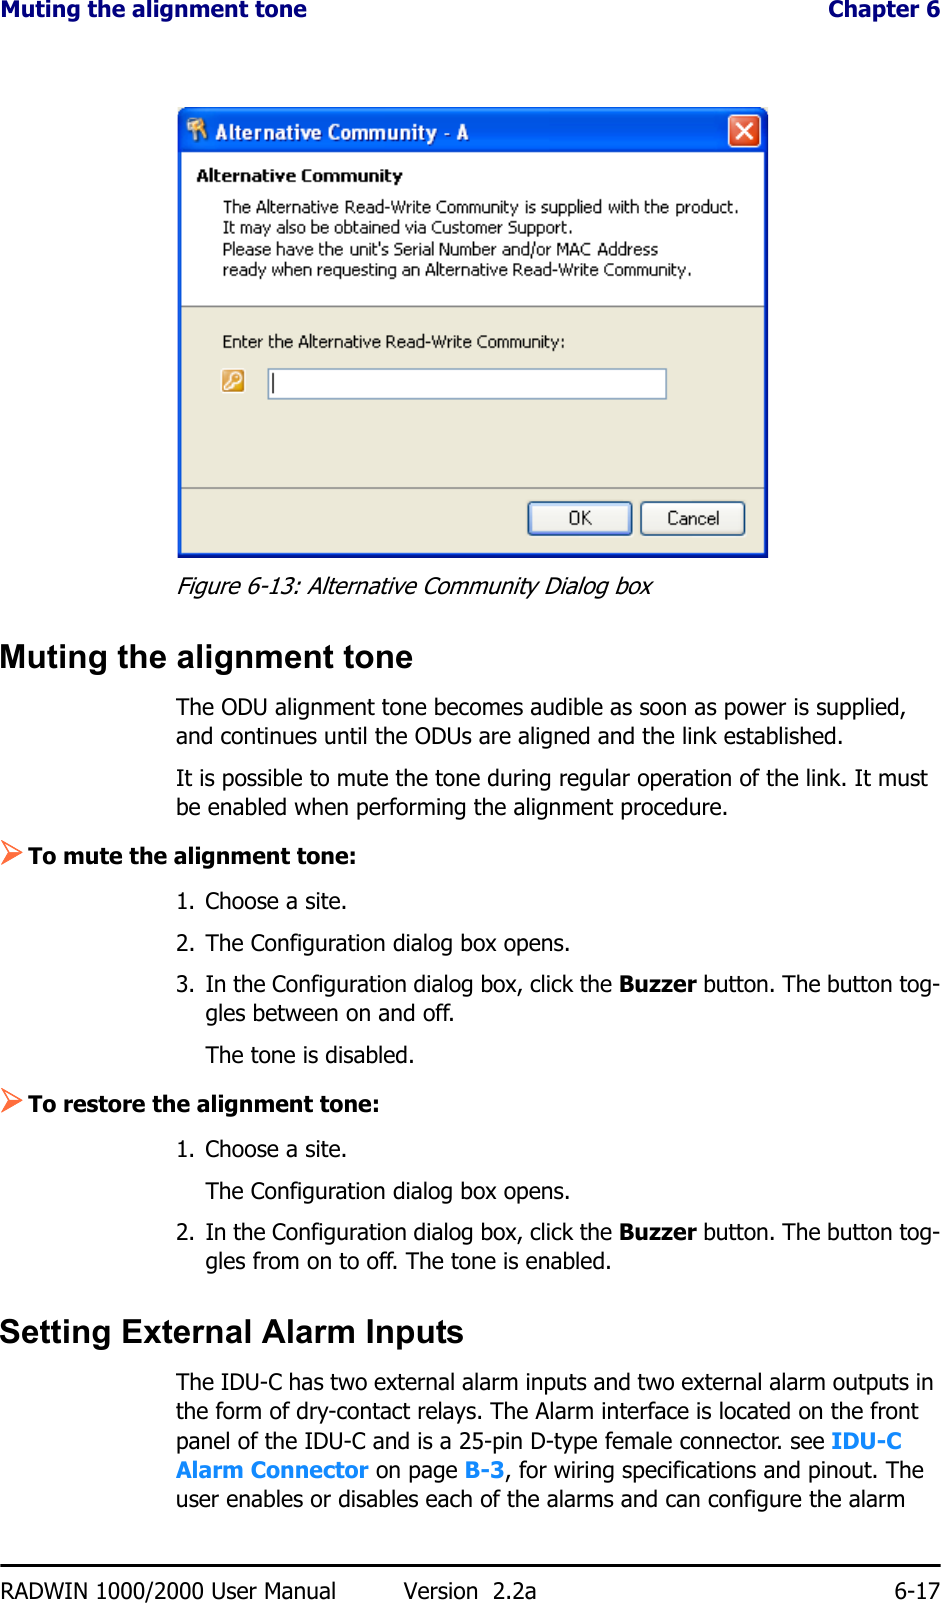 Muting the alignment tone  Chapter 6RADWIN 1000/2000 User Manual Version  2.2a 6-17Figure 6-13: Alternative Community Dialog boxMuting the alignment toneThe ODU alignment tone becomes audible as soon as power is supplied, and continues until the ODUs are aligned and the link established.It is possible to mute the tone during regular operation of the link. It must be enabled when performing the alignment procedure.¾To mute the alignment tone:1. Choose a site.2. The Configuration dialog box opens.3. In the Configuration dialog box, click the Buzzer button. The button tog-gles between on and off.The tone is disabled.¾To restore the alignment tone:1. Choose a site.The Configuration dialog box opens.2. In the Configuration dialog box, click the Buzzer button. The button tog-gles from on to off. The tone is enabled.Setting External Alarm InputsThe IDU-C has two external alarm inputs and two external alarm outputs in the form of dry-contact relays. The Alarm interface is located on the front panel of the IDU-C and is a 25-pin D-type female connector. see IDU-C Alarm Connector on page B-3, for wiring specifications and pinout. The user enables or disables each of the alarms and can configure the alarm 